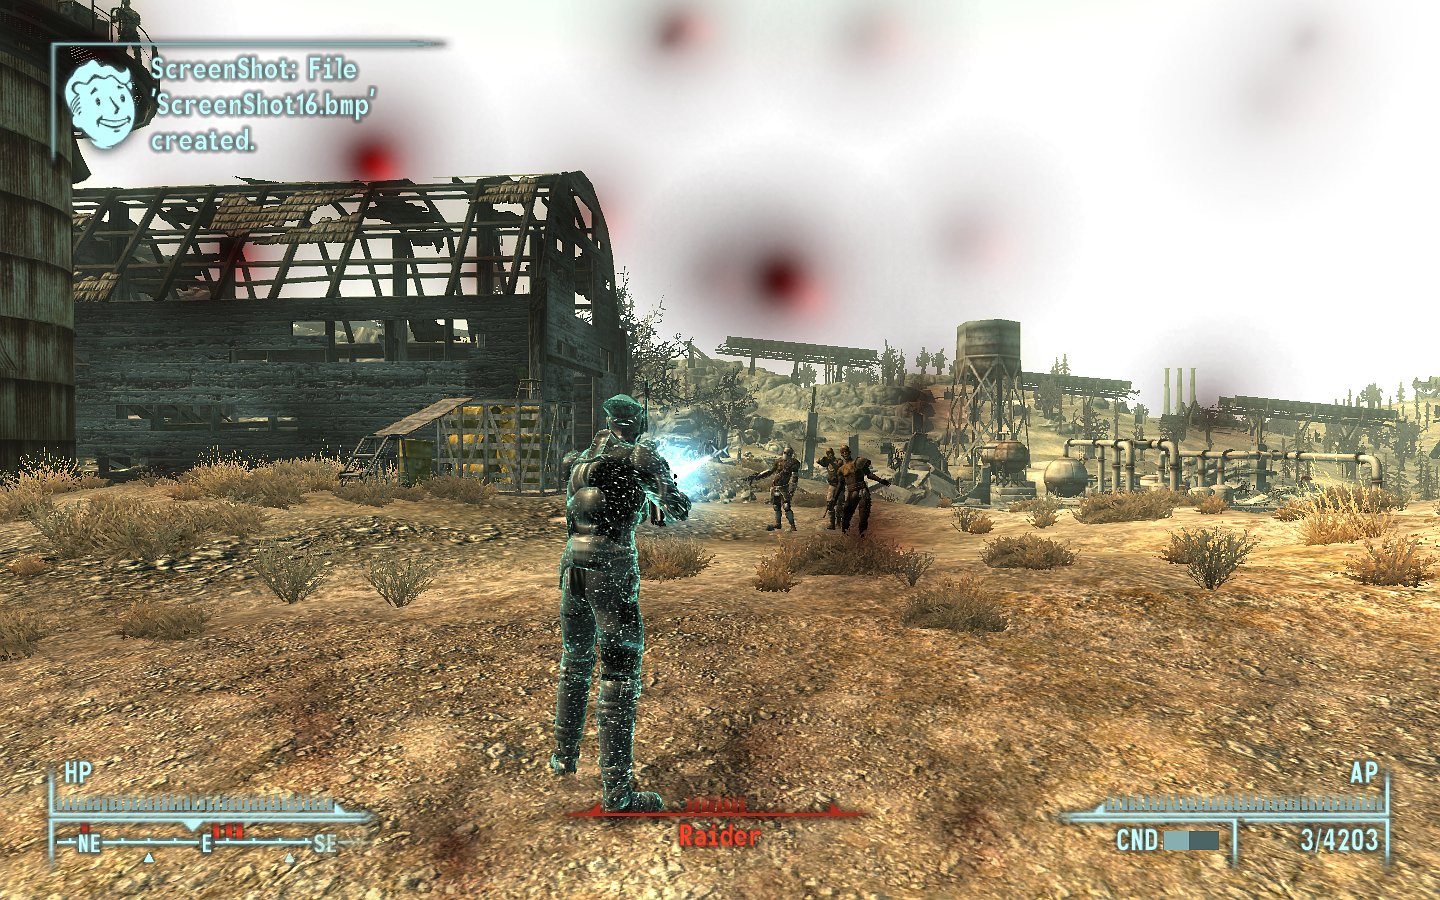 Pictures from the mod image - Fallout 3: Space Frontier mod for Fallout 3.